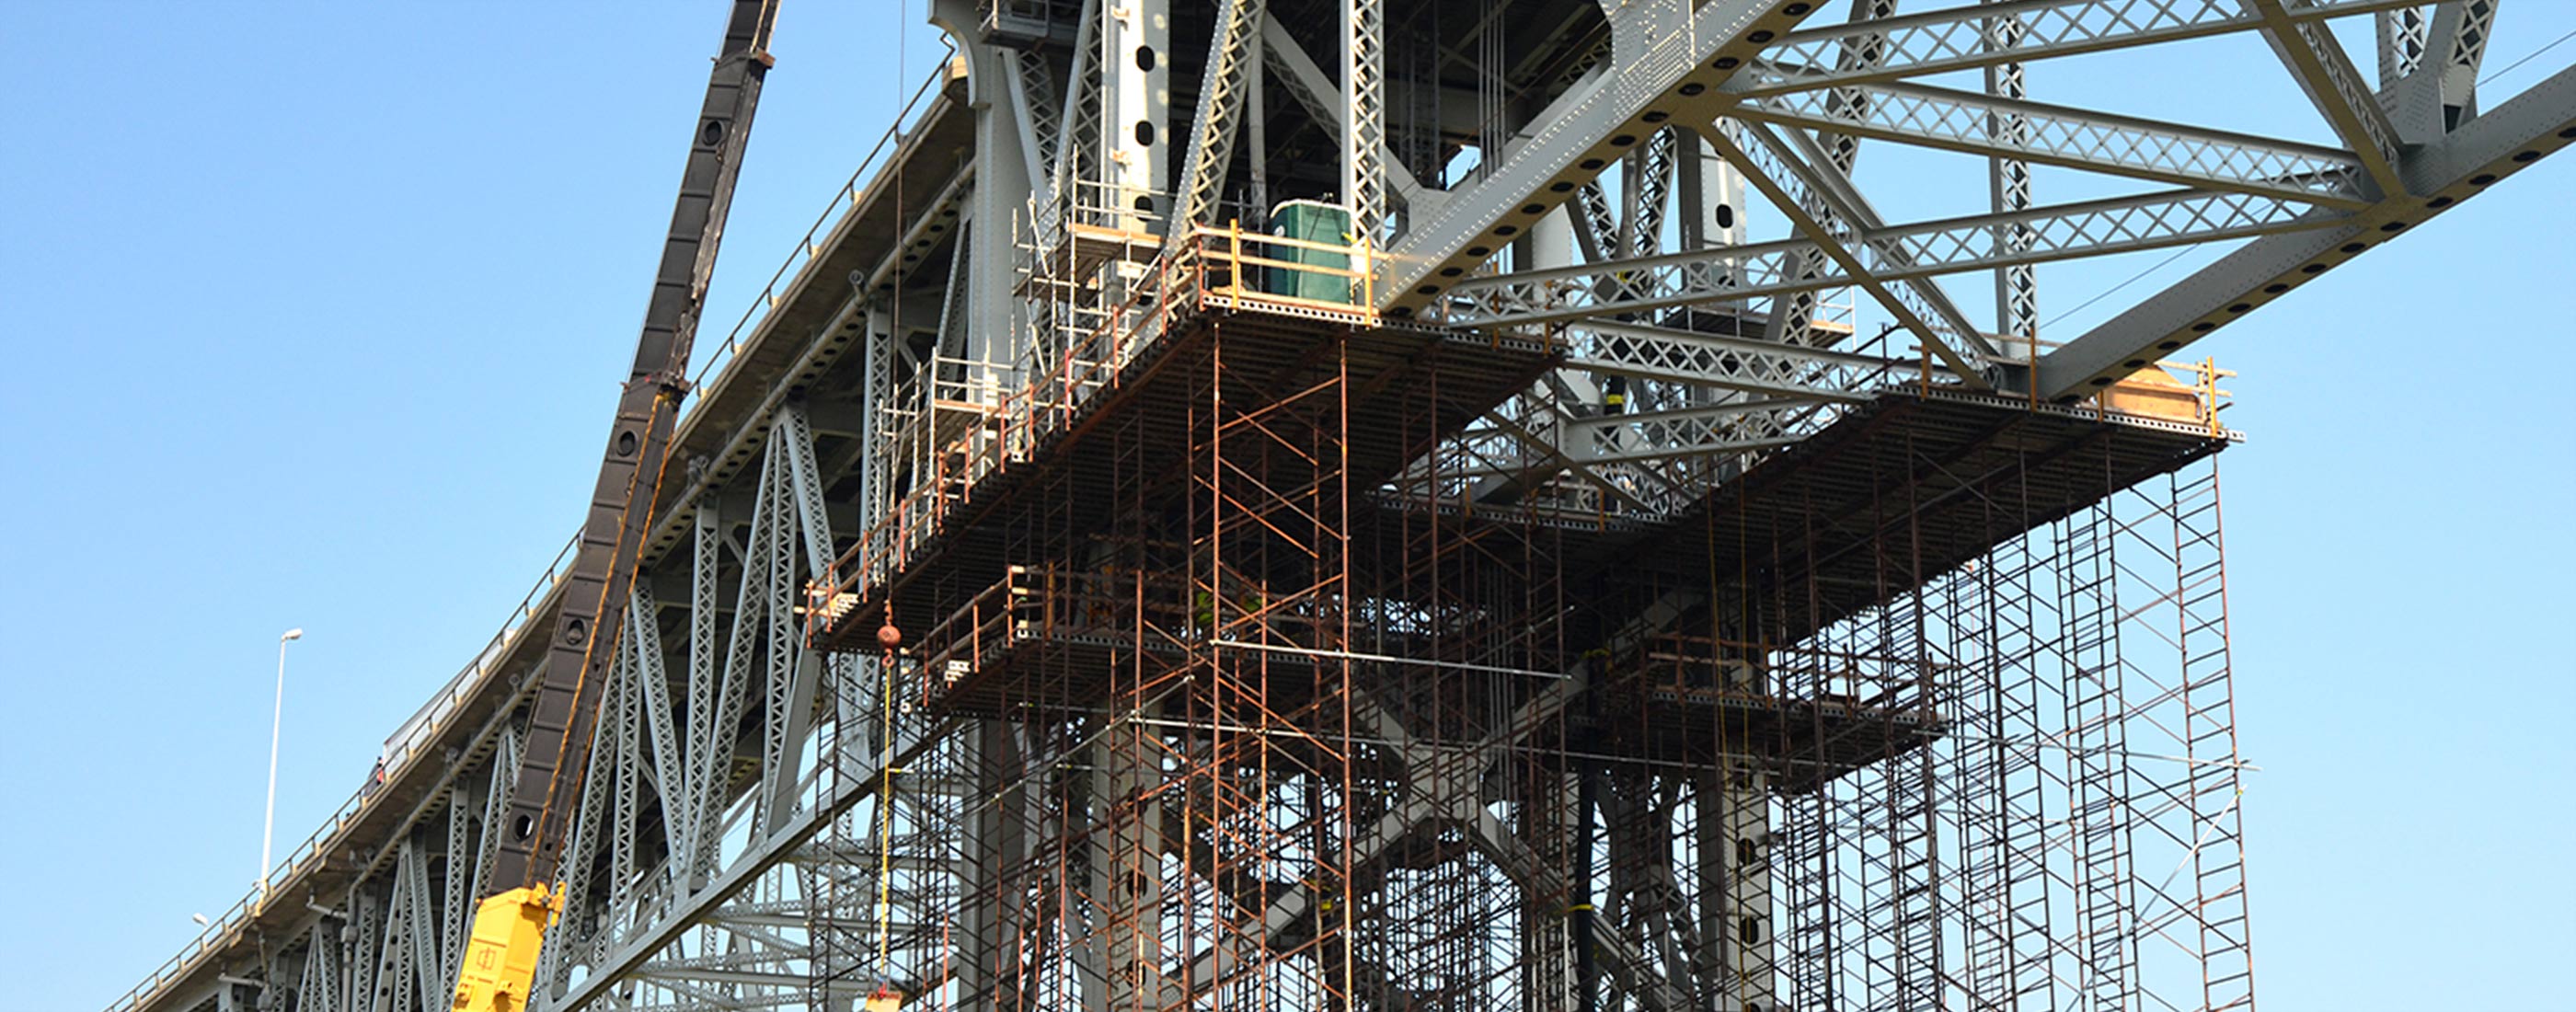 Construction on the Blue Water Bridge was led by OHM Advisors.